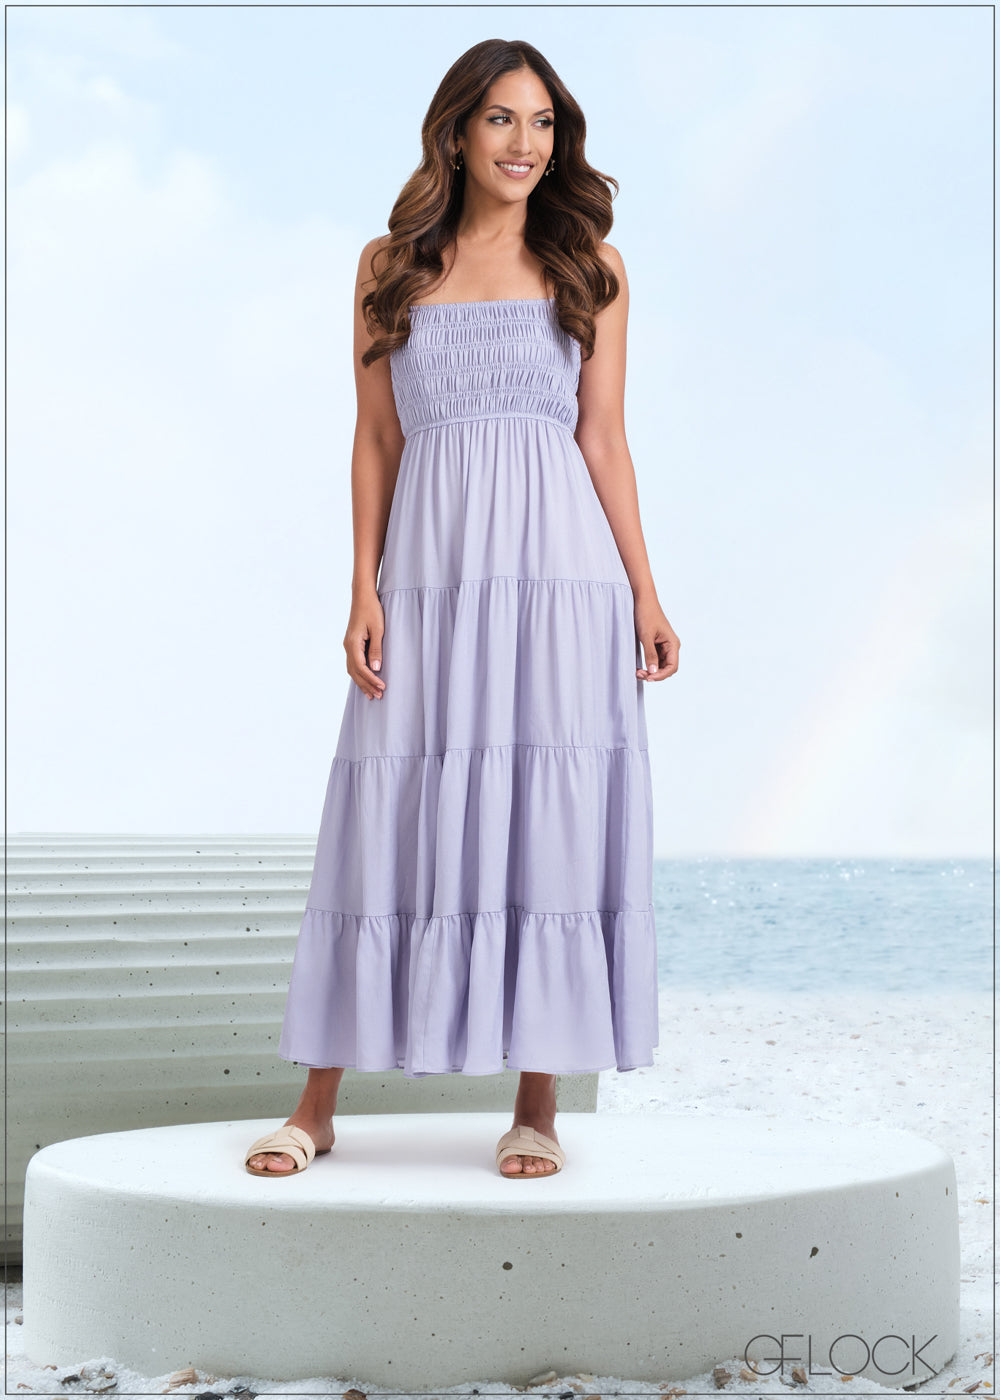 Tiered Strappy Maxi Dress - 260623